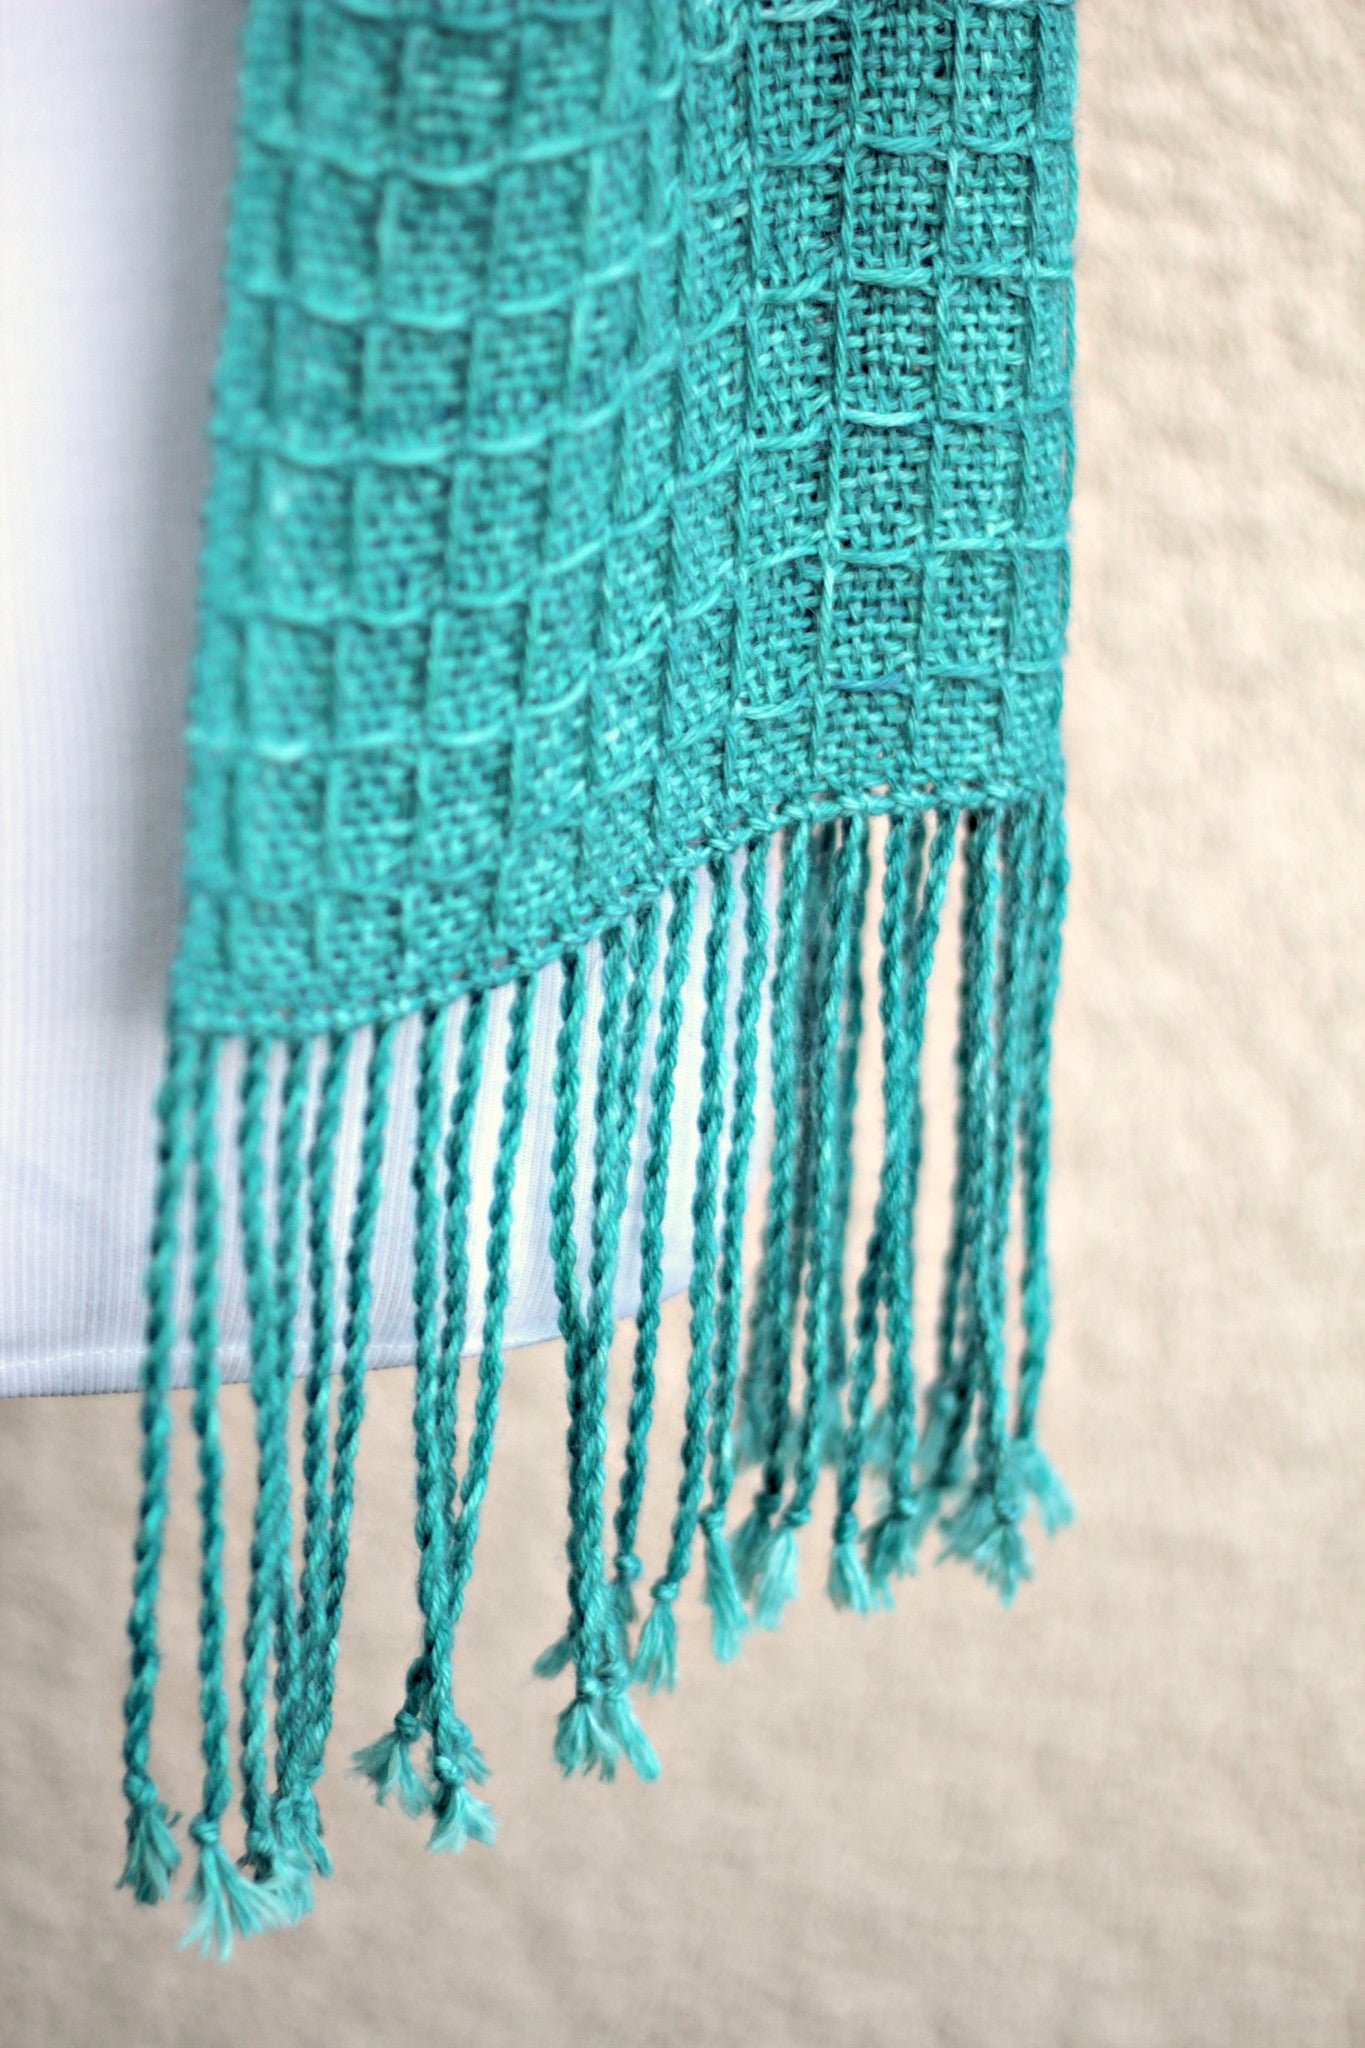 Hand woven scarf in turquoise teal colors in waffle pattern